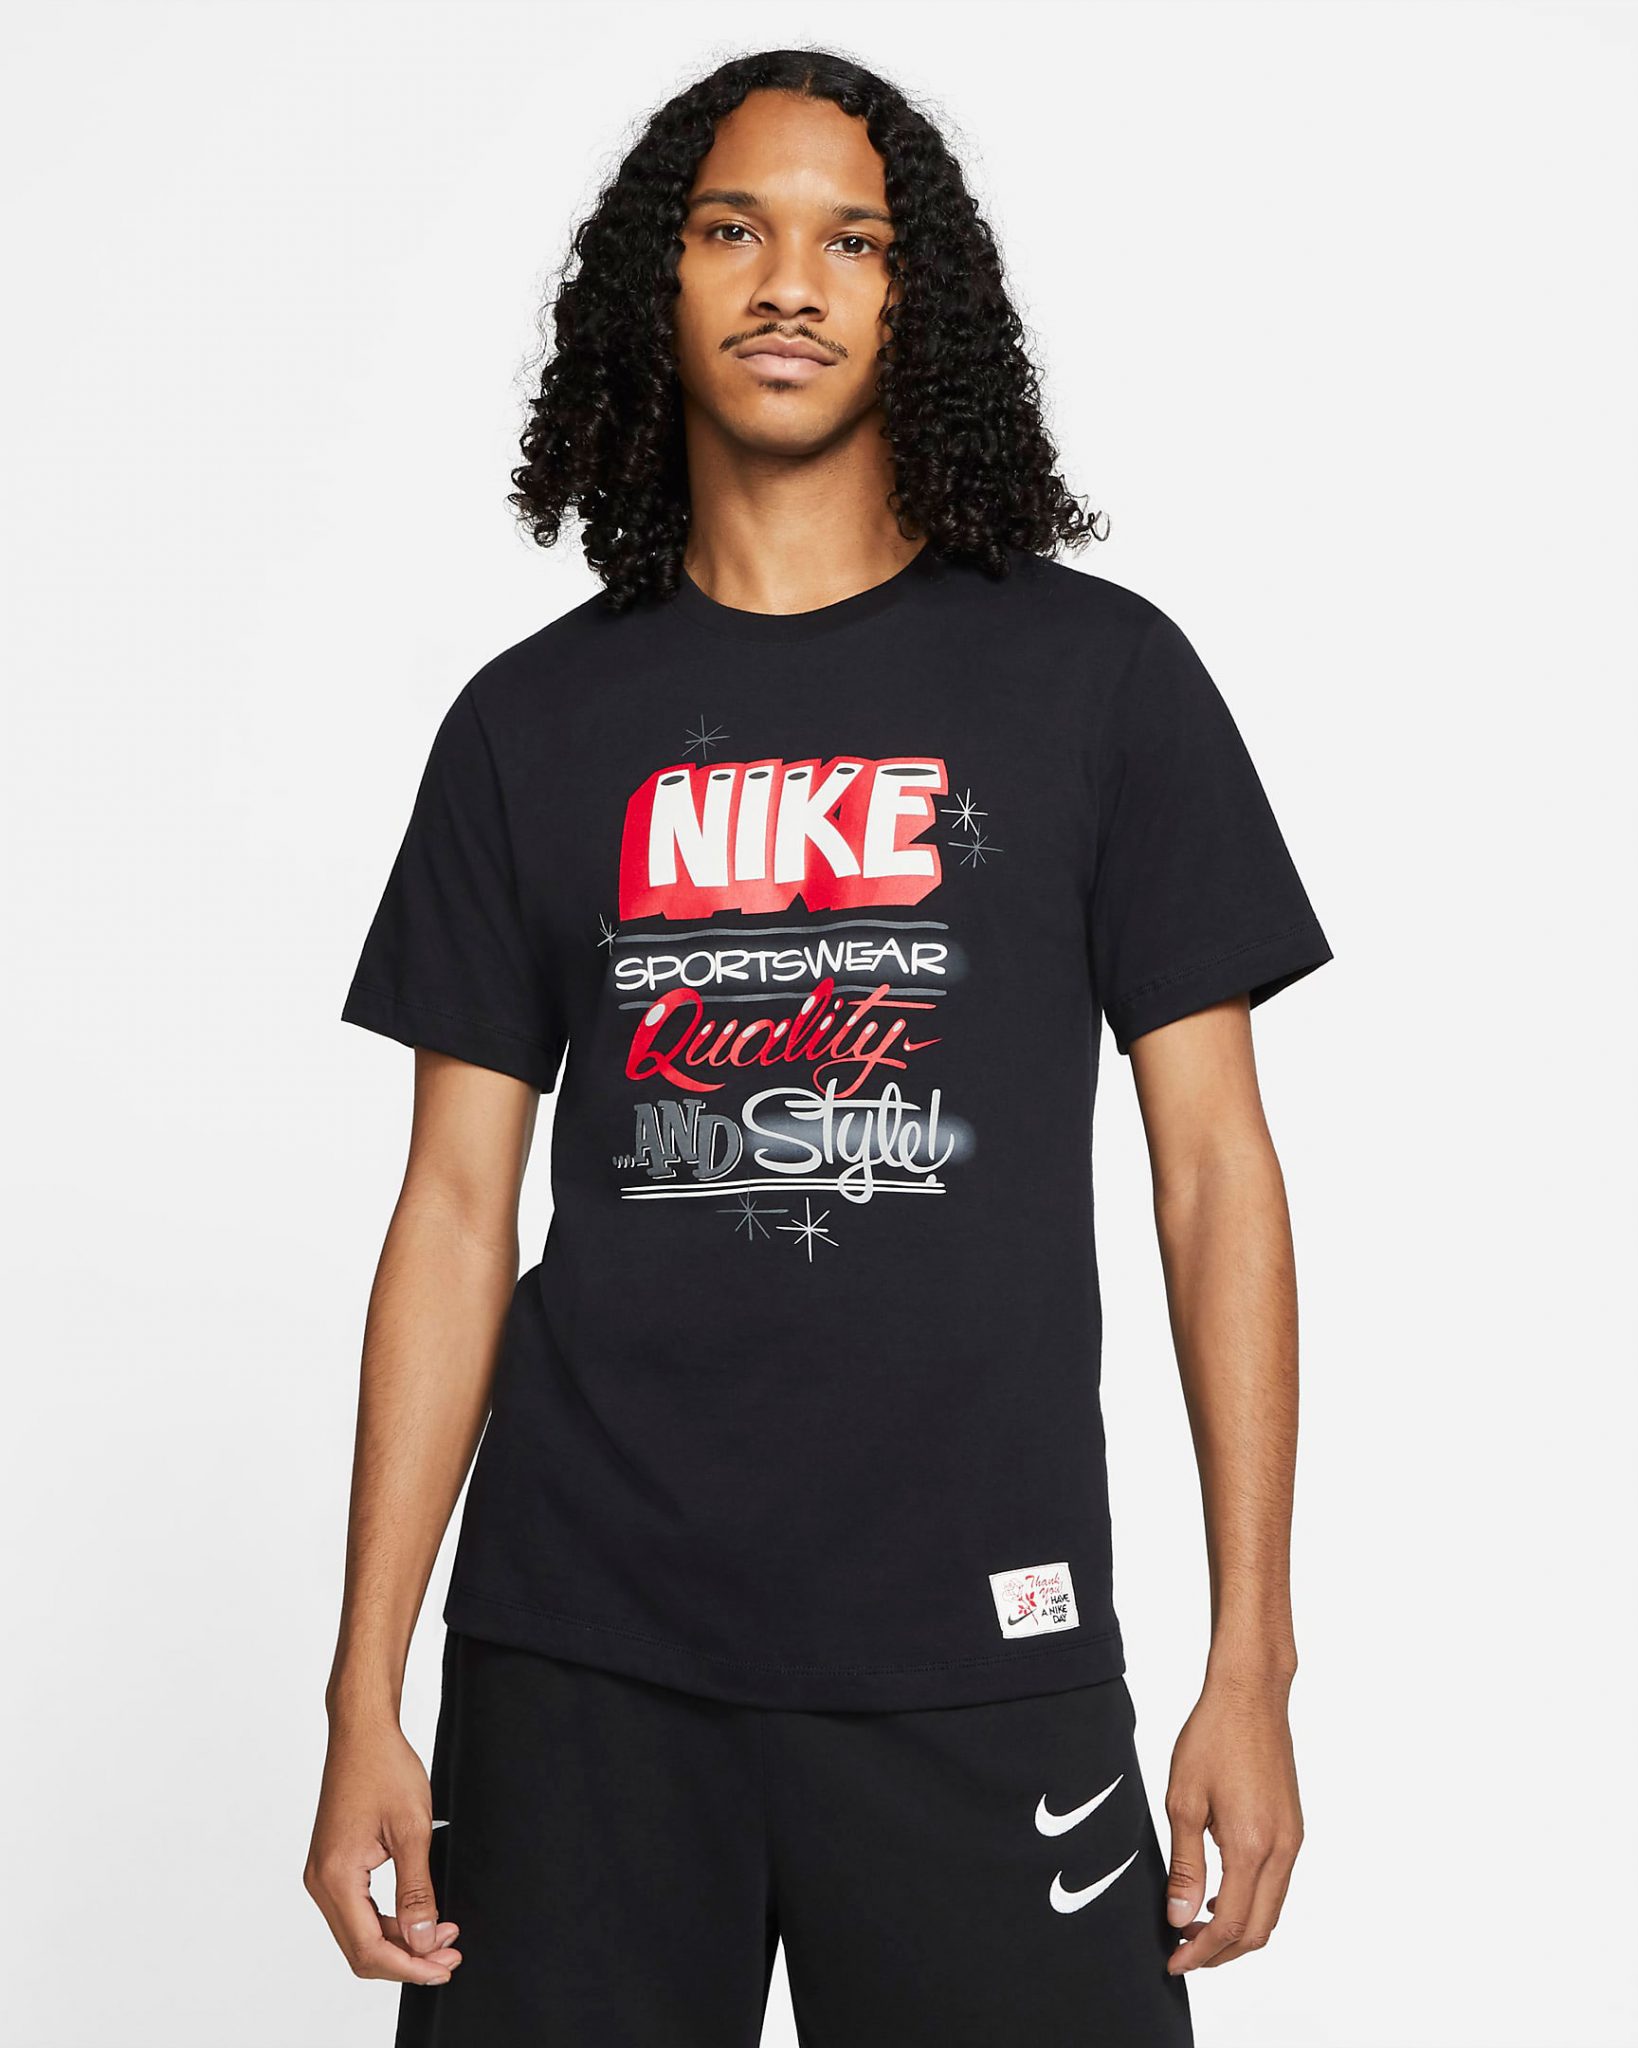 Nike Dunk Low Black White Shirts Hats Outfits to Match